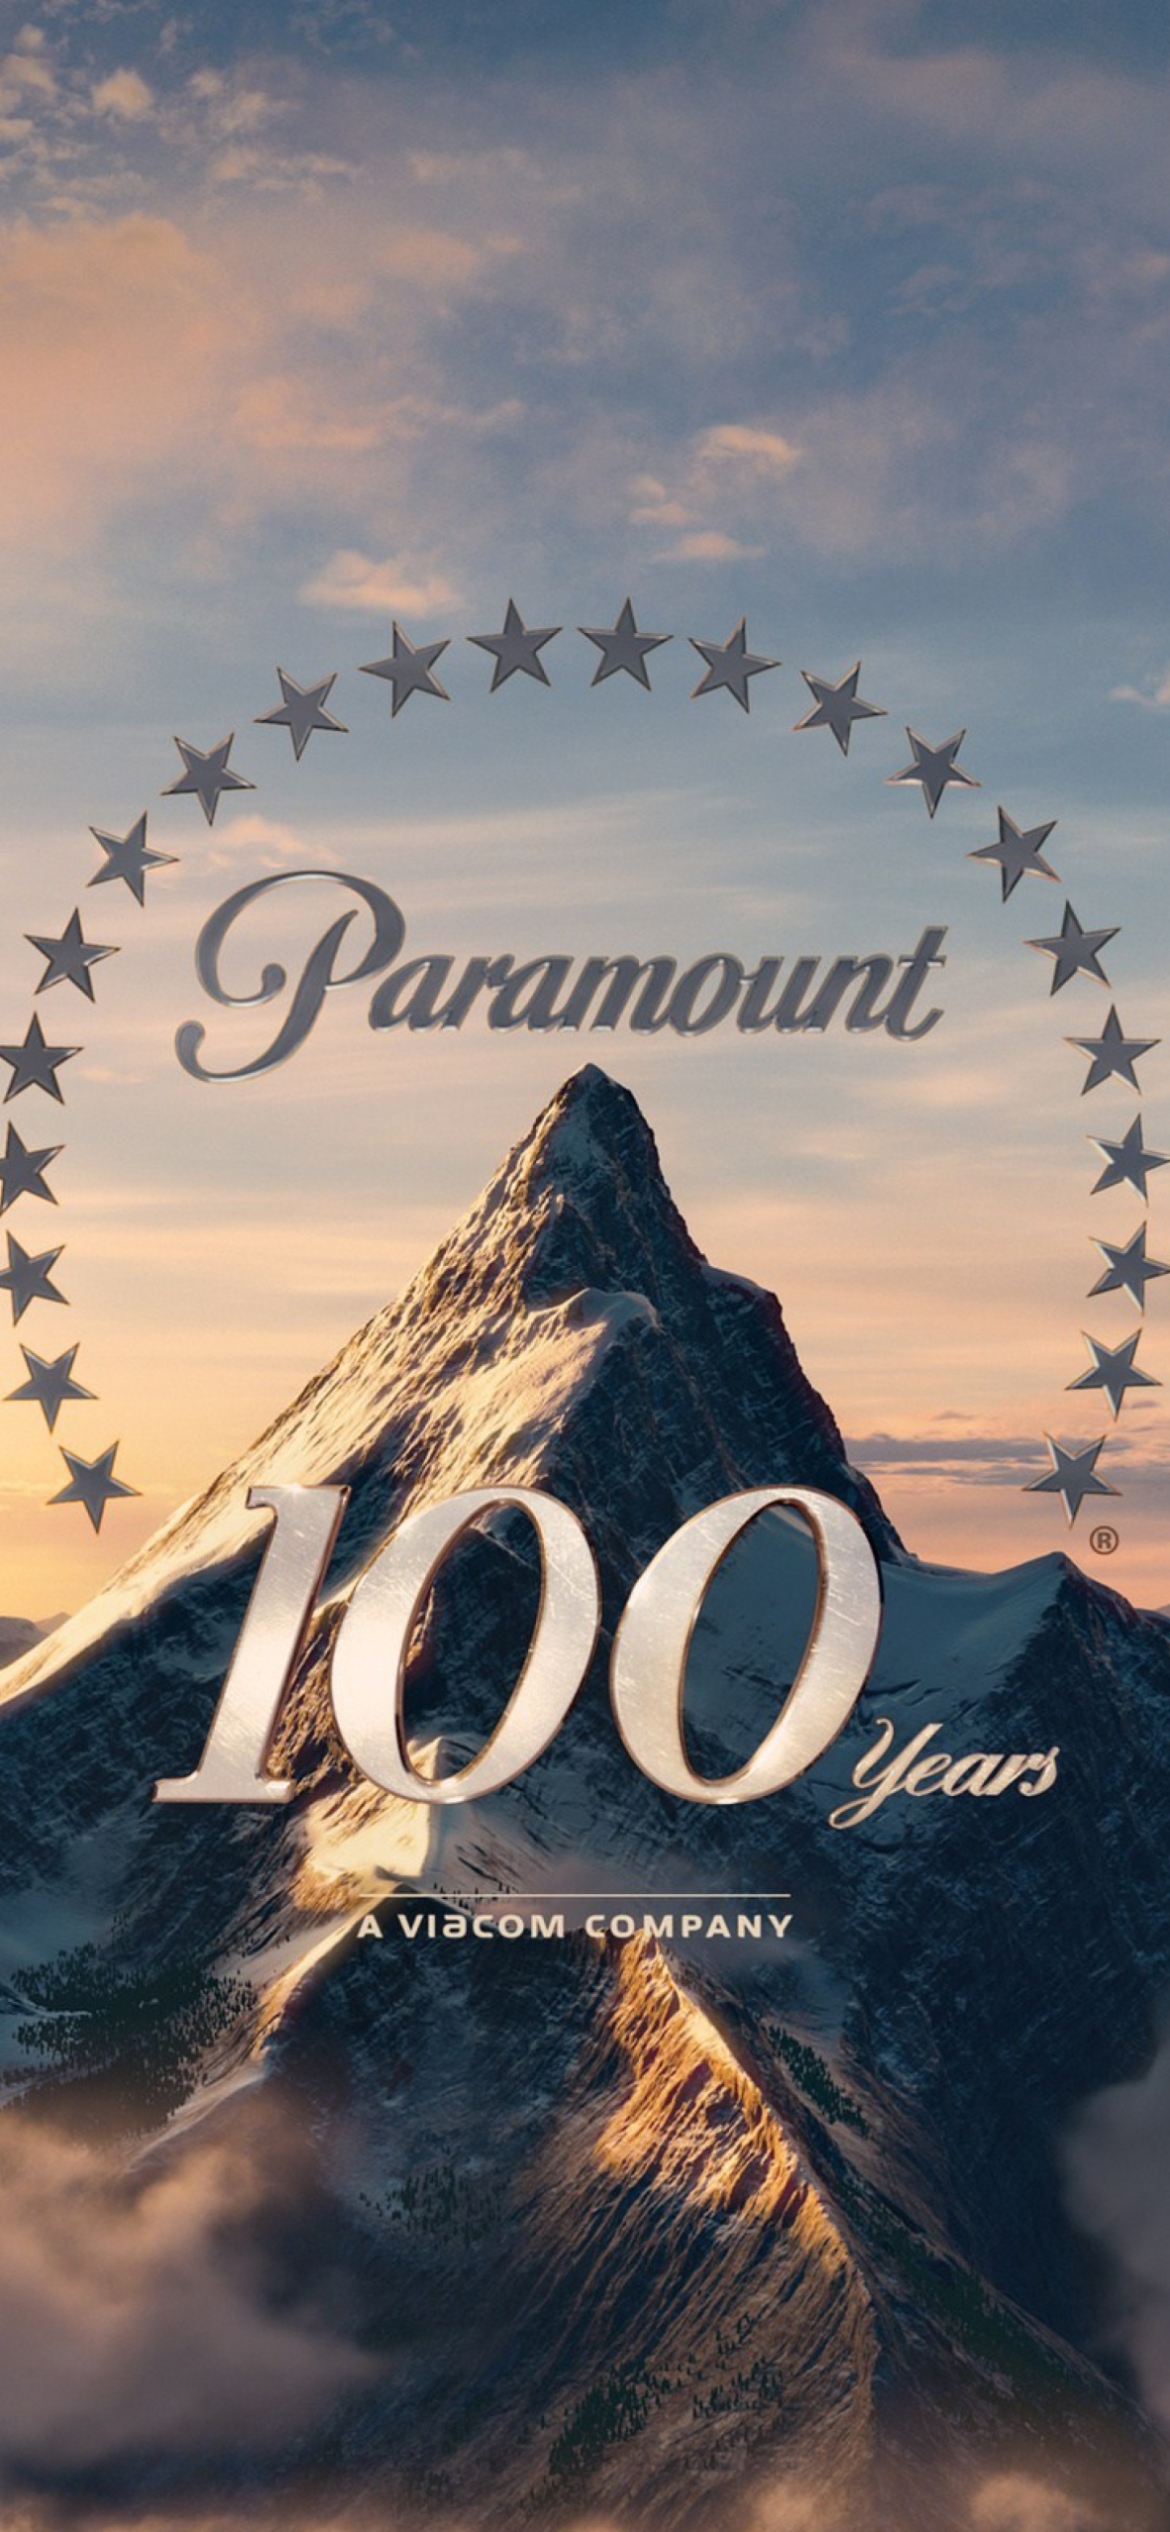 Das Paramount Pictures 100 Years Wallpaper 1170x2532